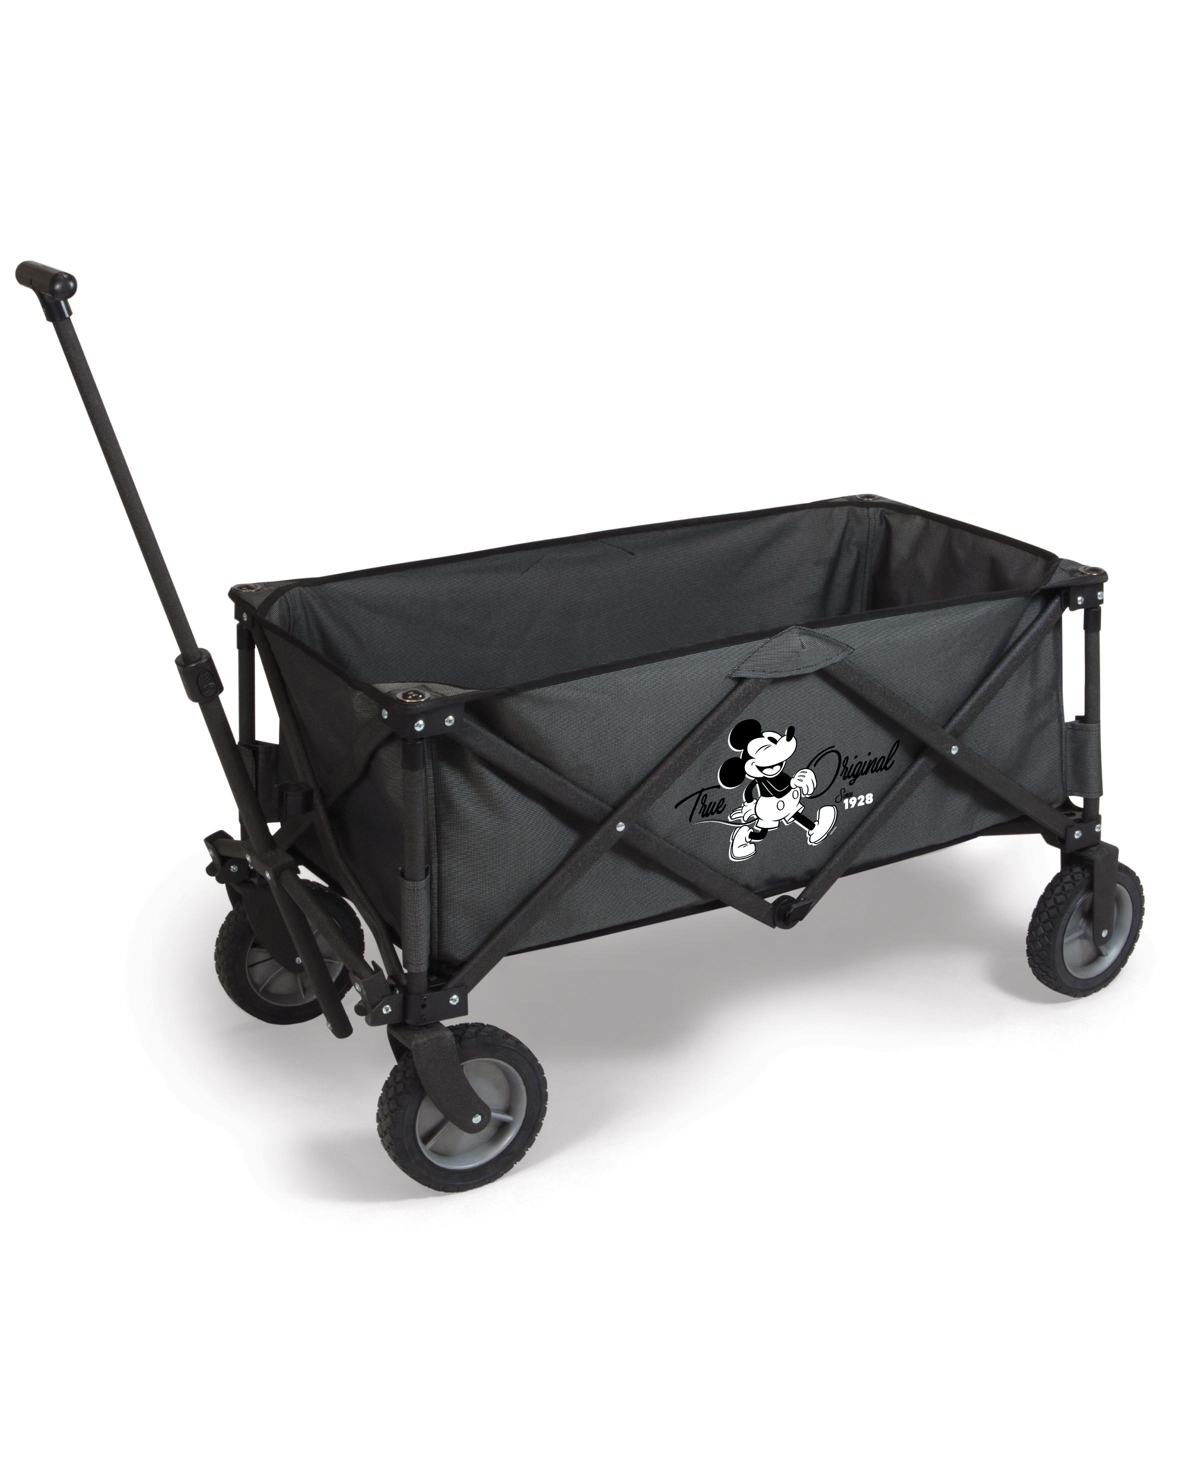 Oniva by Picnic Time Disney's Mickey Mouse Adventure Wagon Portable Utility Wagon - Grey